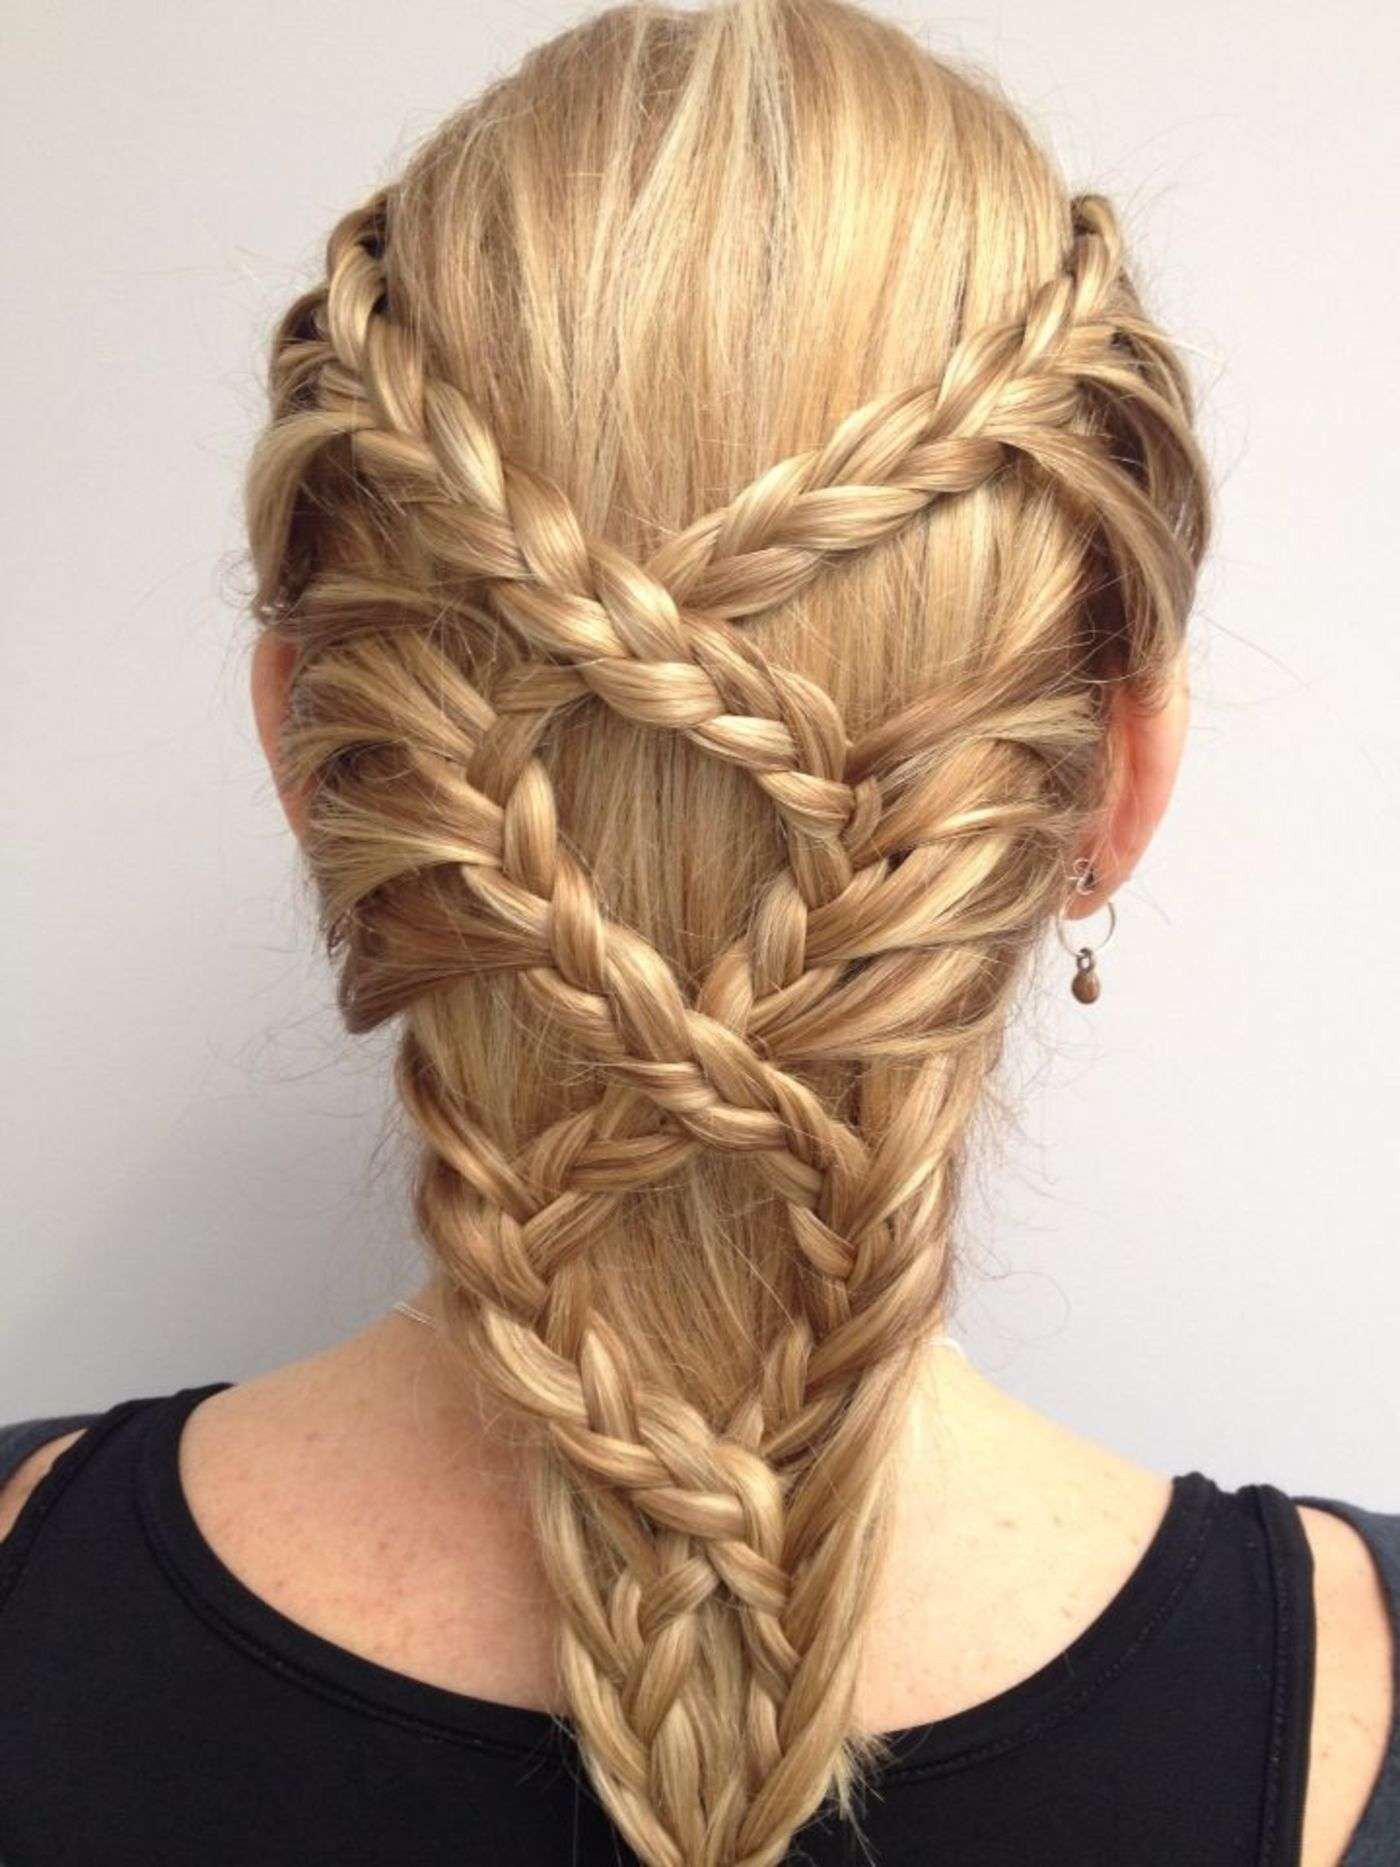 Cool Braided Hairstyles
 Dare to Wear These 20 Crazy Hairstyles MagMent